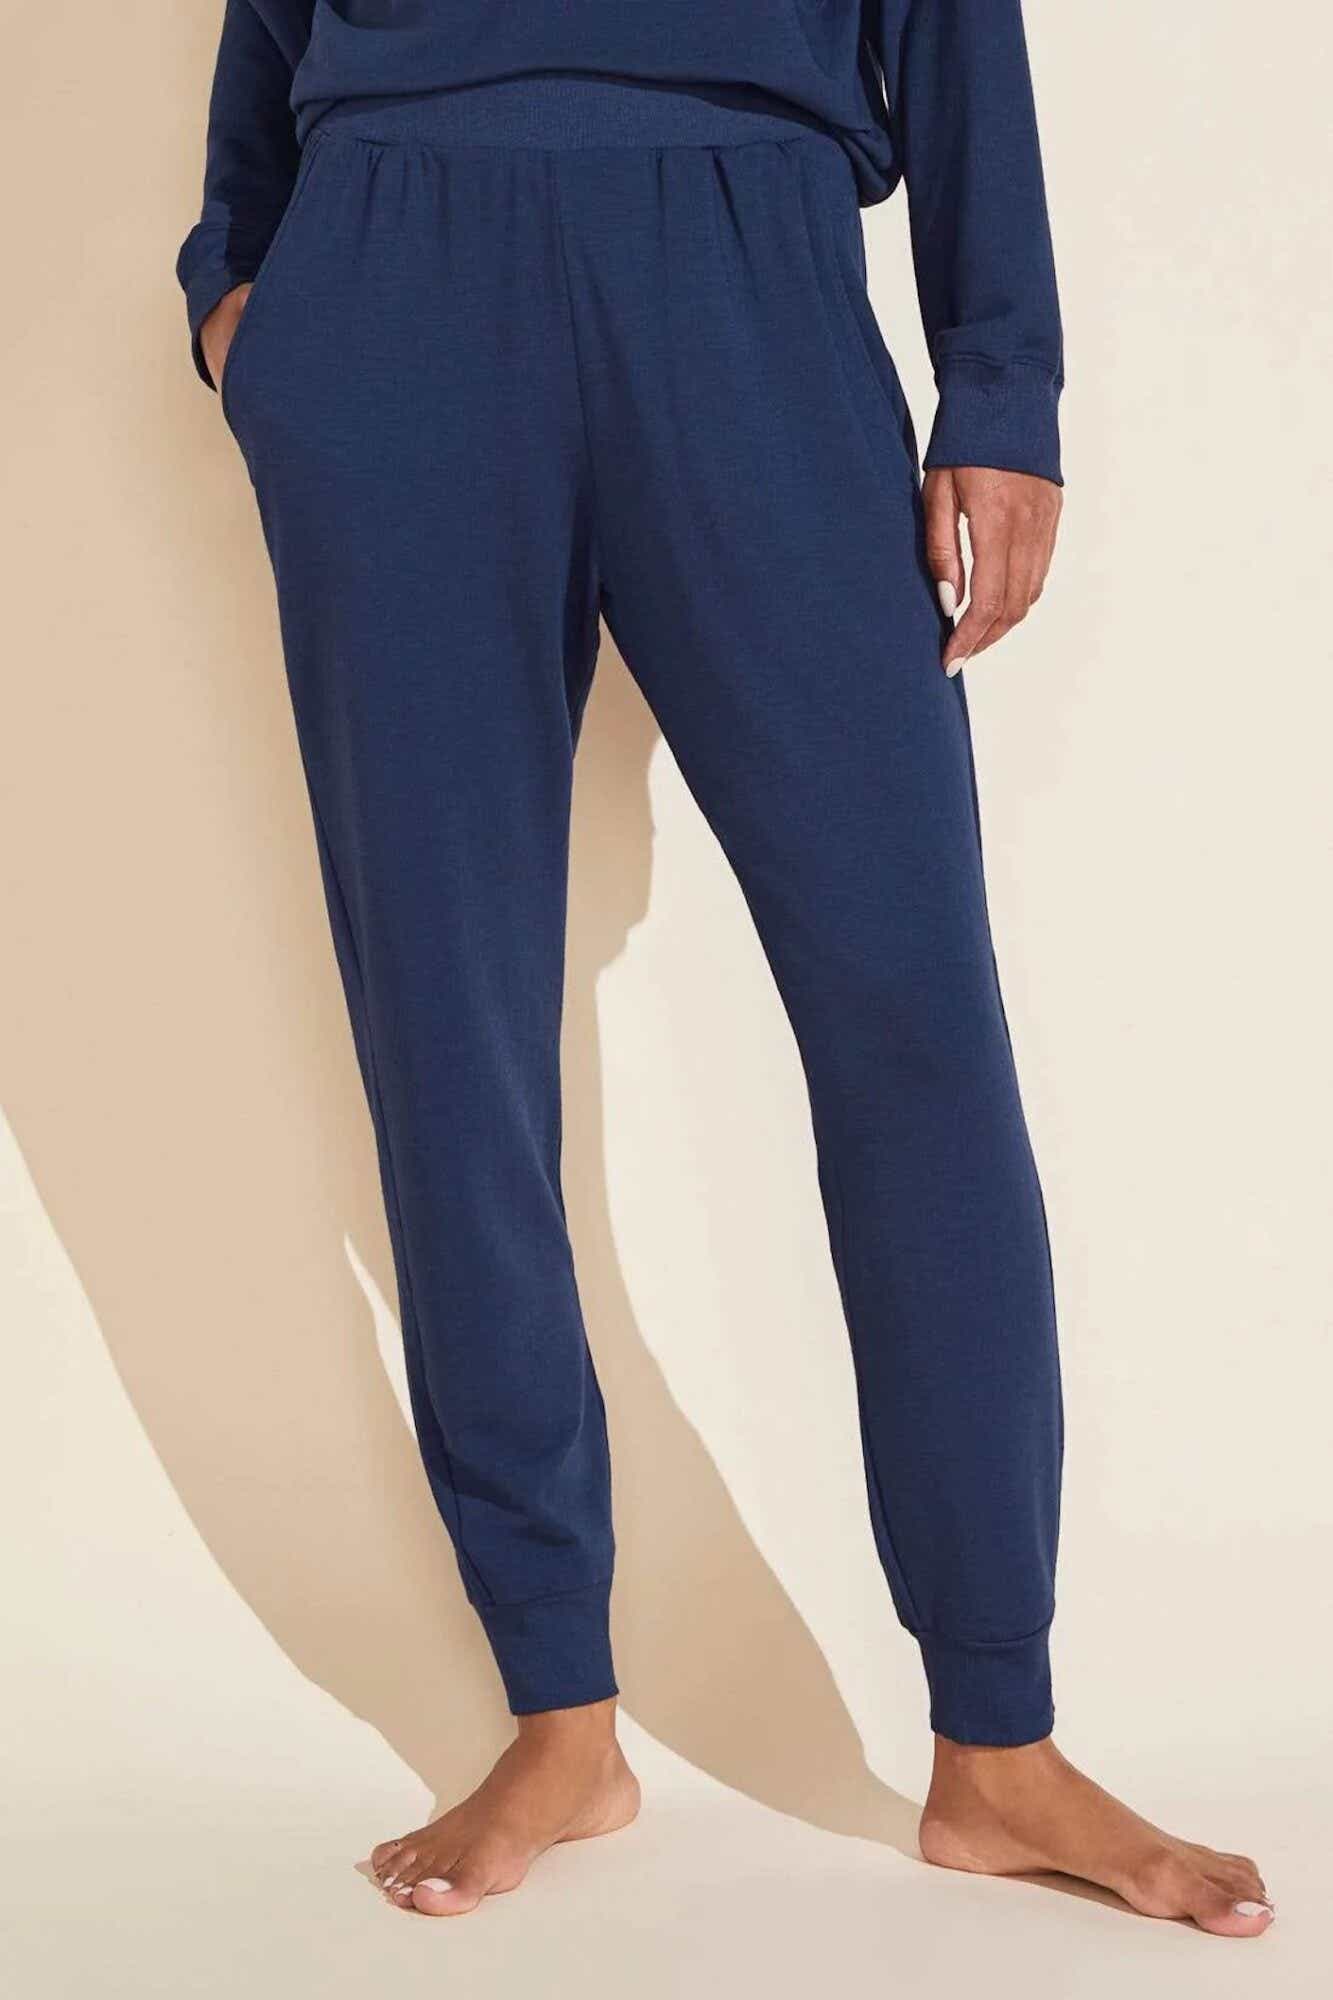 The lower half of a person wearing soft, dark blue, knit lounge pants that are fitted at the hem.